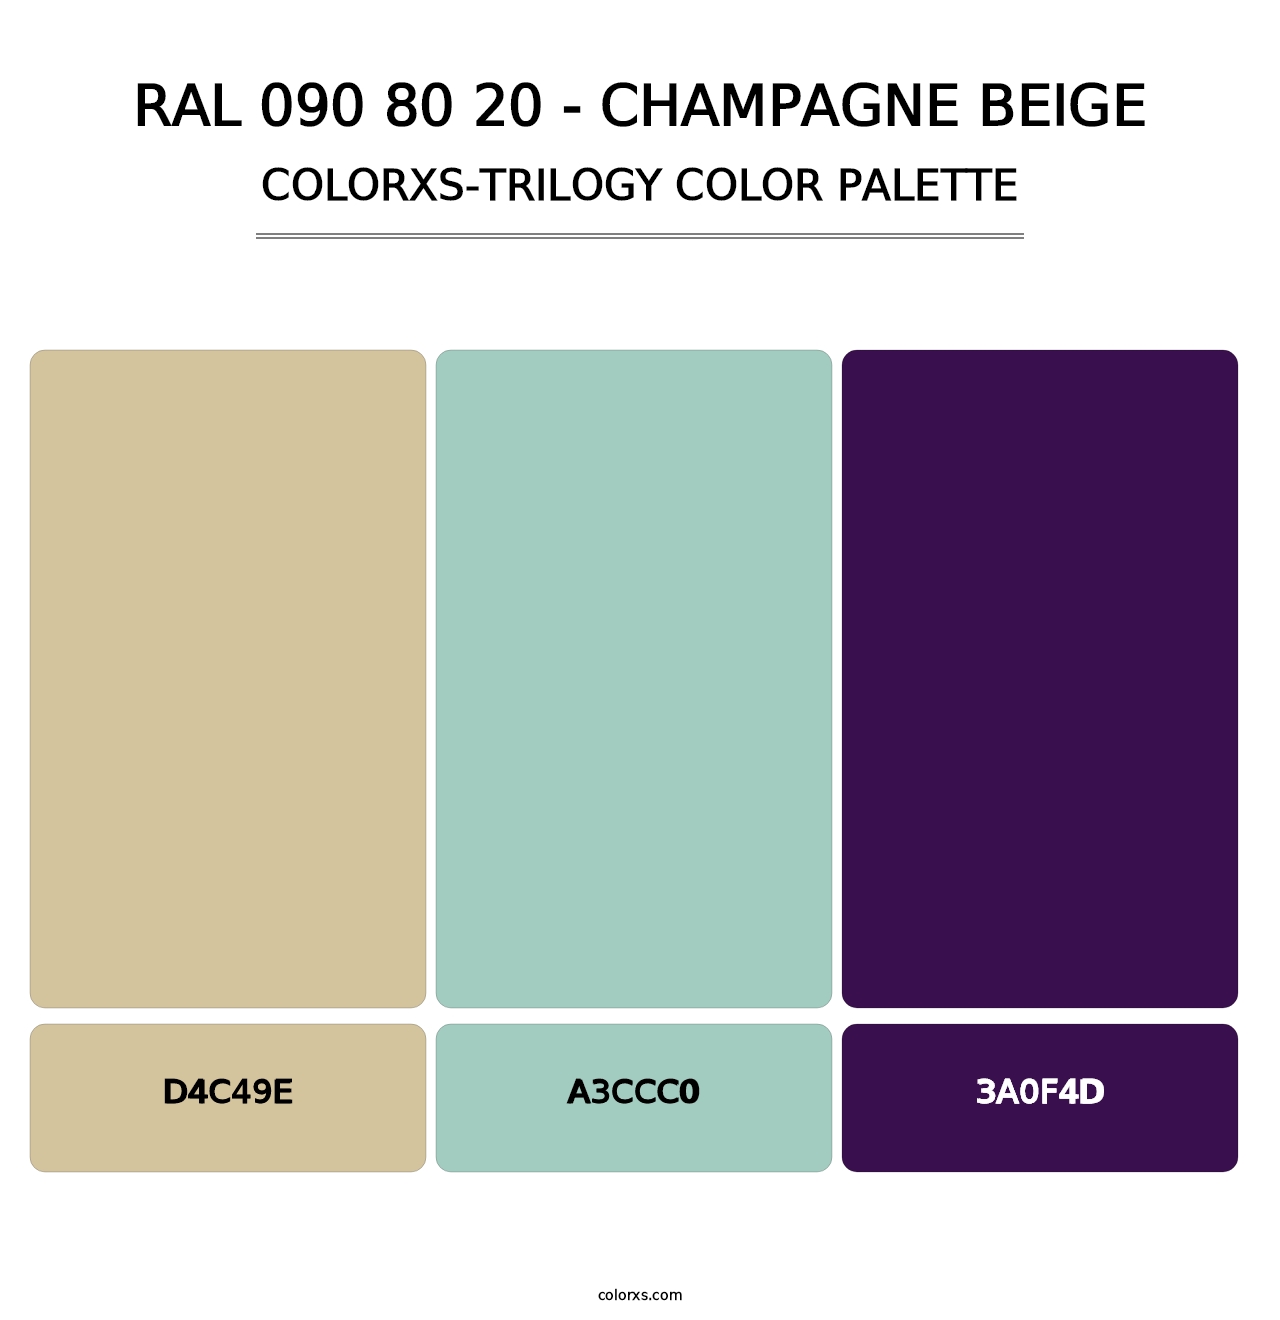 RAL 090 80 20 - Champagne Beige - Colorxs Trilogy Palette